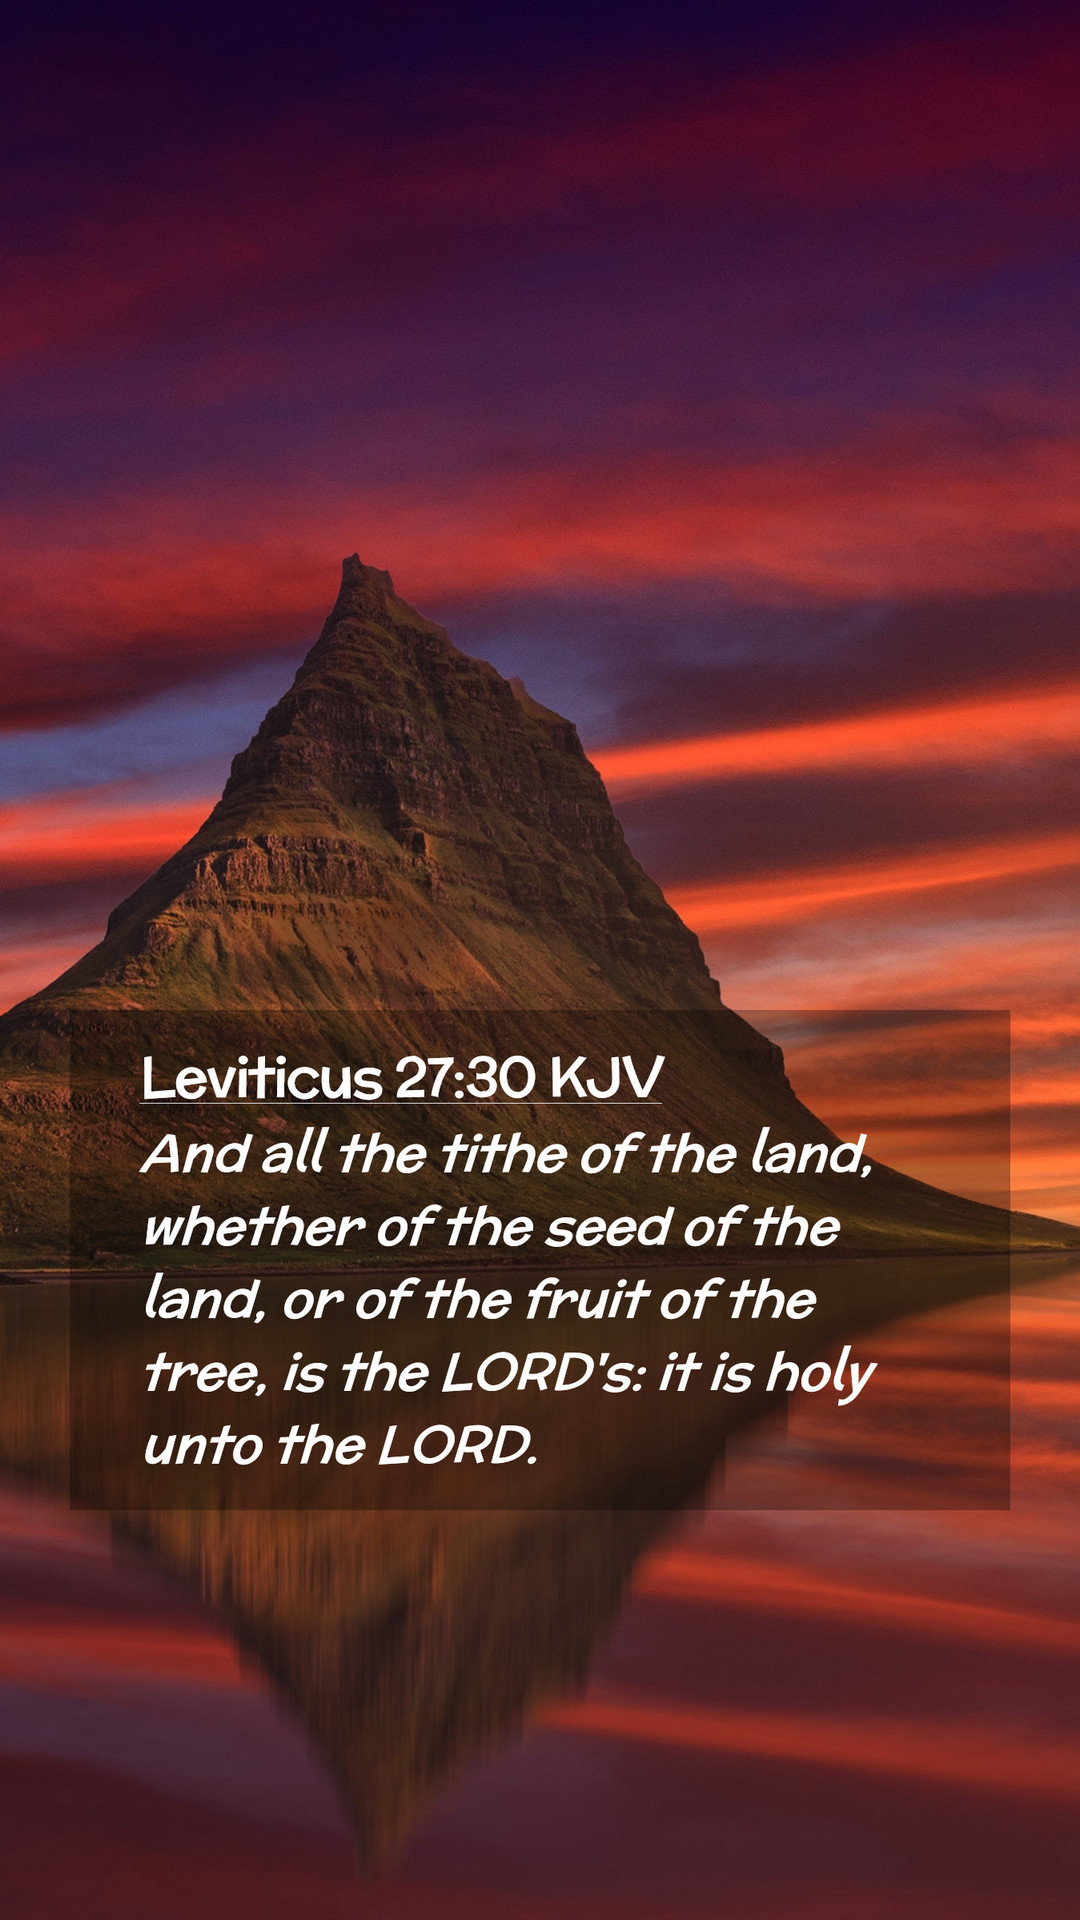 Leviticus 27:30 KJV Mobile Phone Wallpaper all the tithe of the land, whether of the